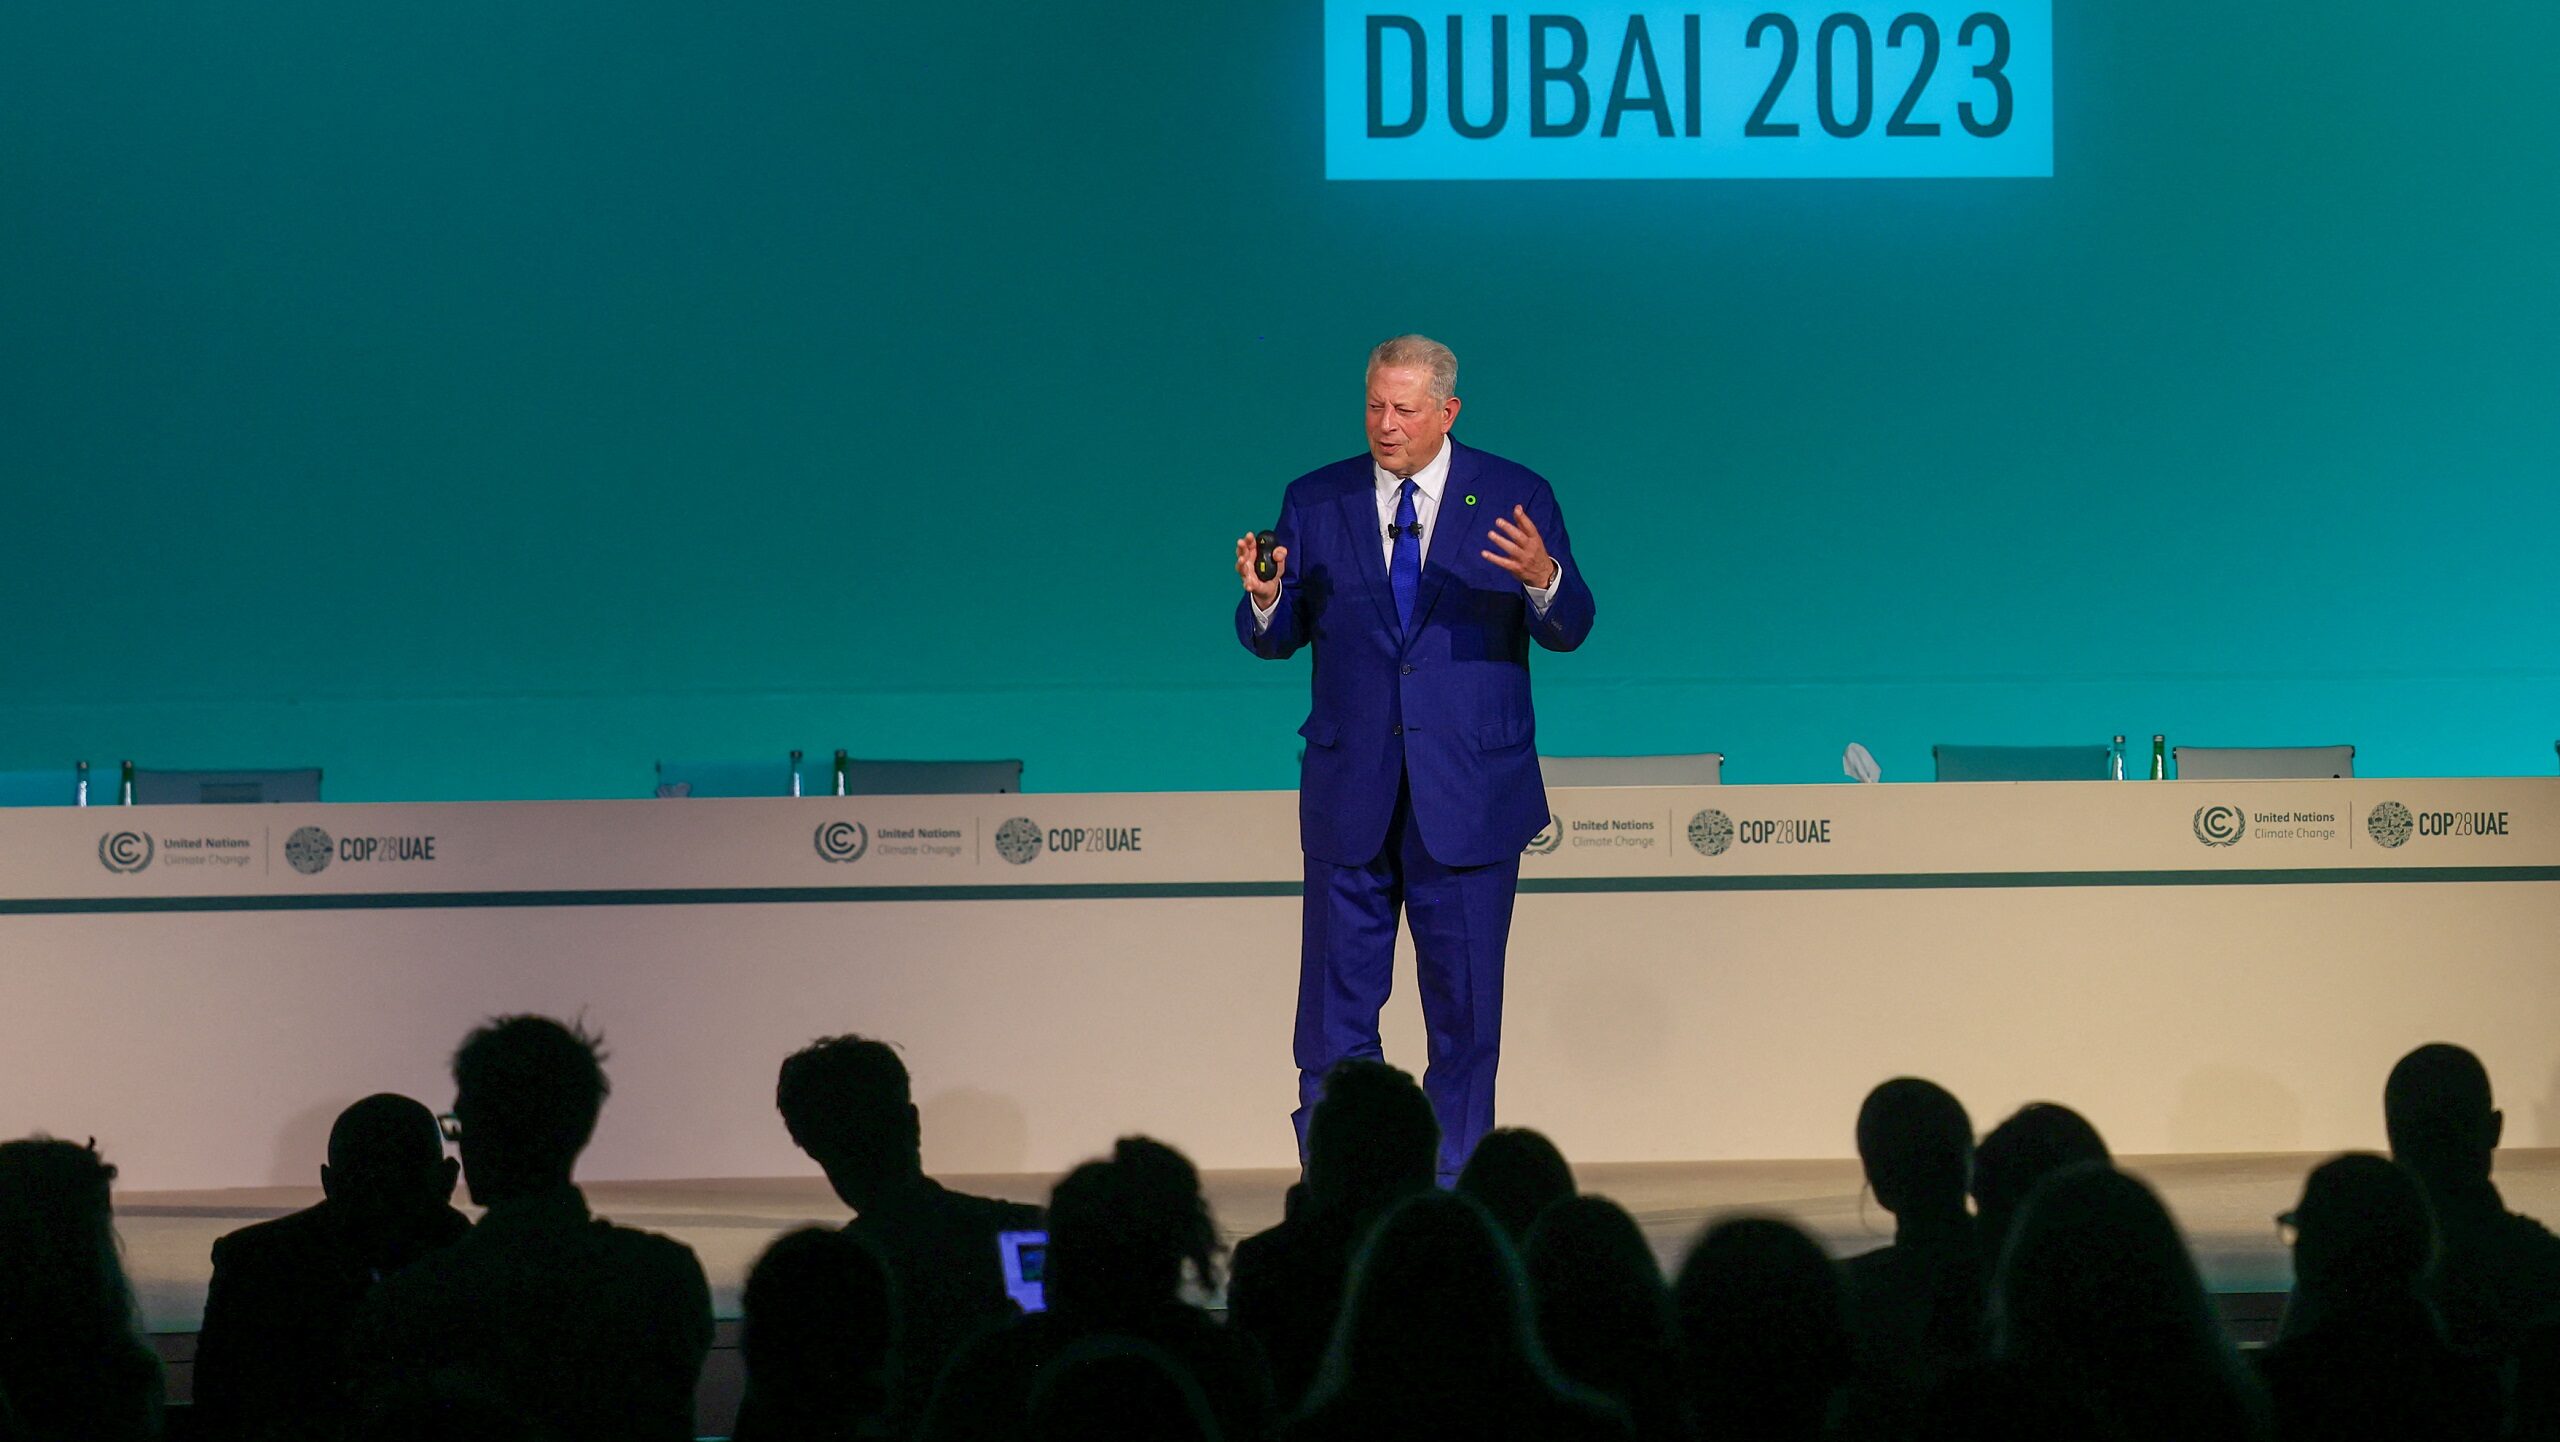 Former US VP Gore Slams Oil Industry, UN Climate Chief’s Role in Emissions Issue